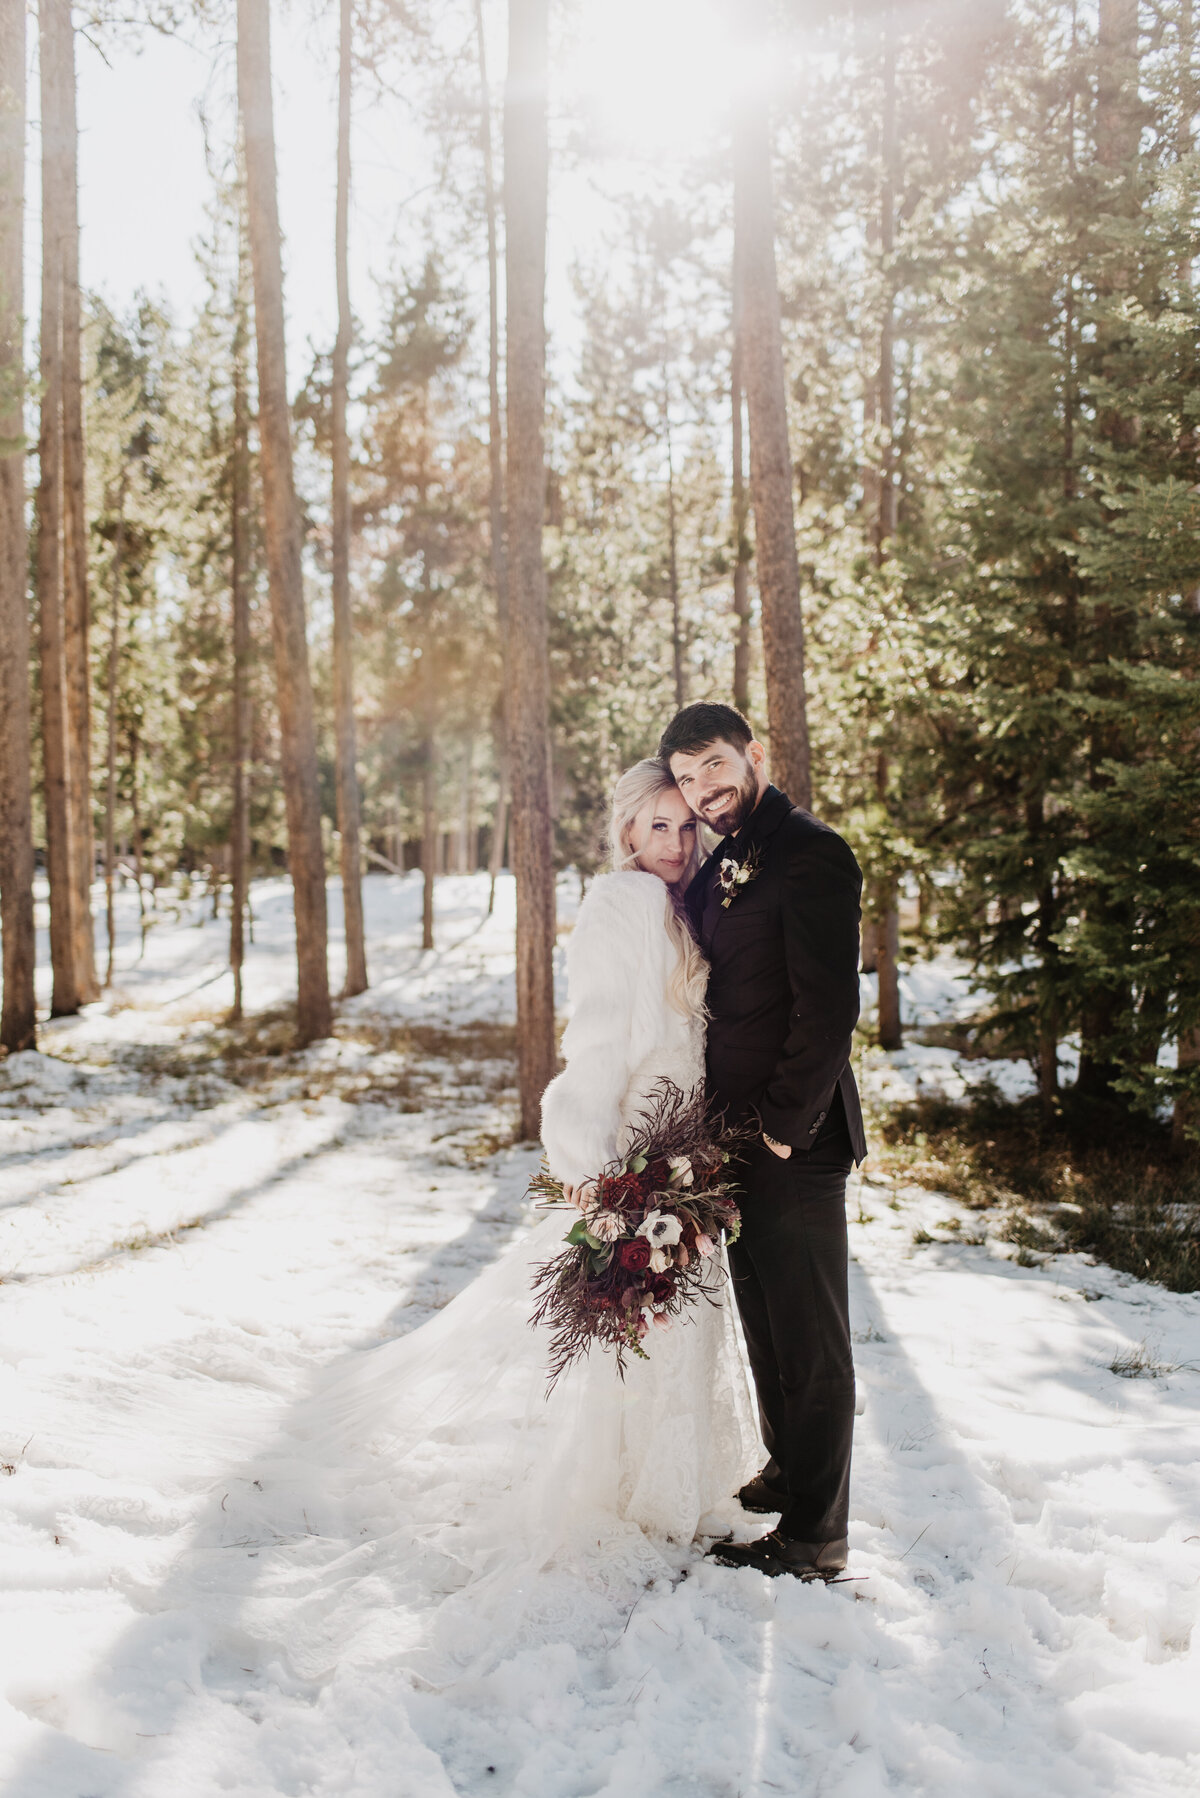 Jackson Hole Photographers capture bride and groom in snow